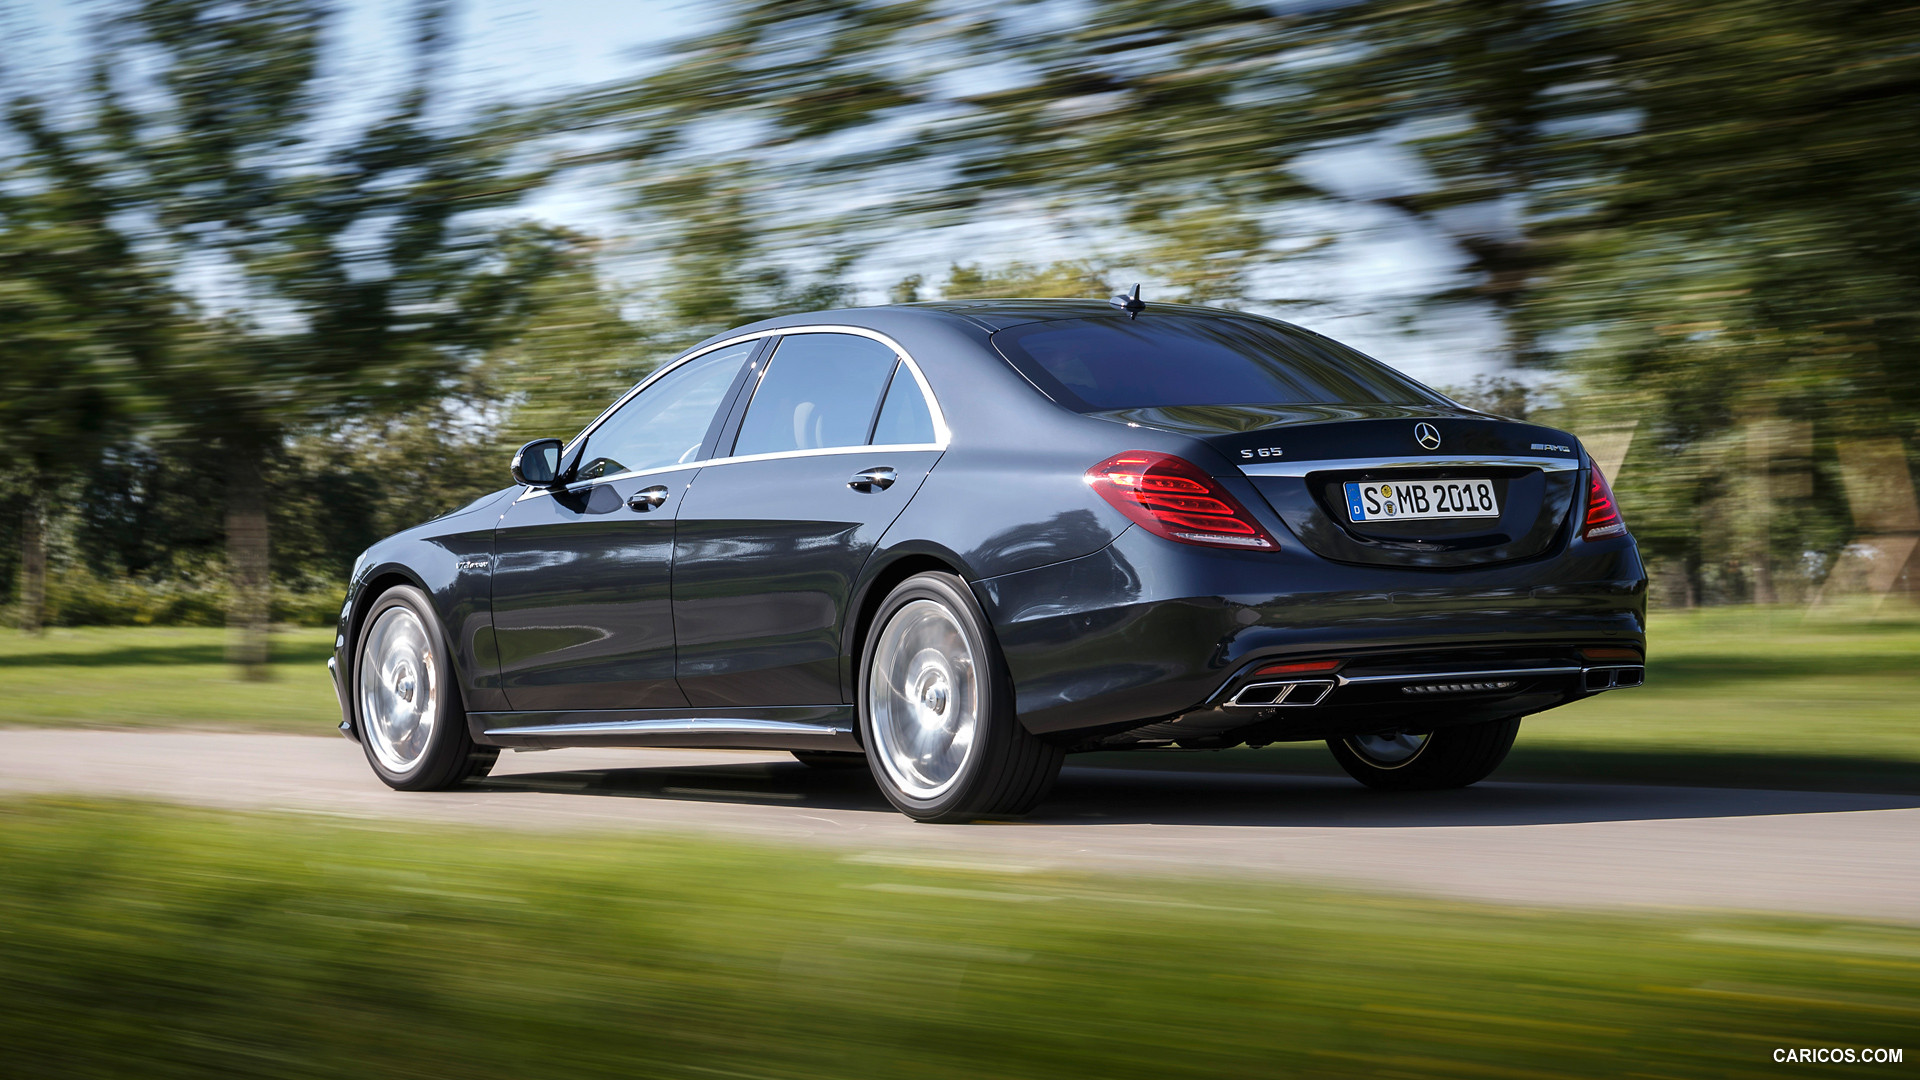 Images of 2014 Mercedes-Benz S65 AMG | 1920x1080